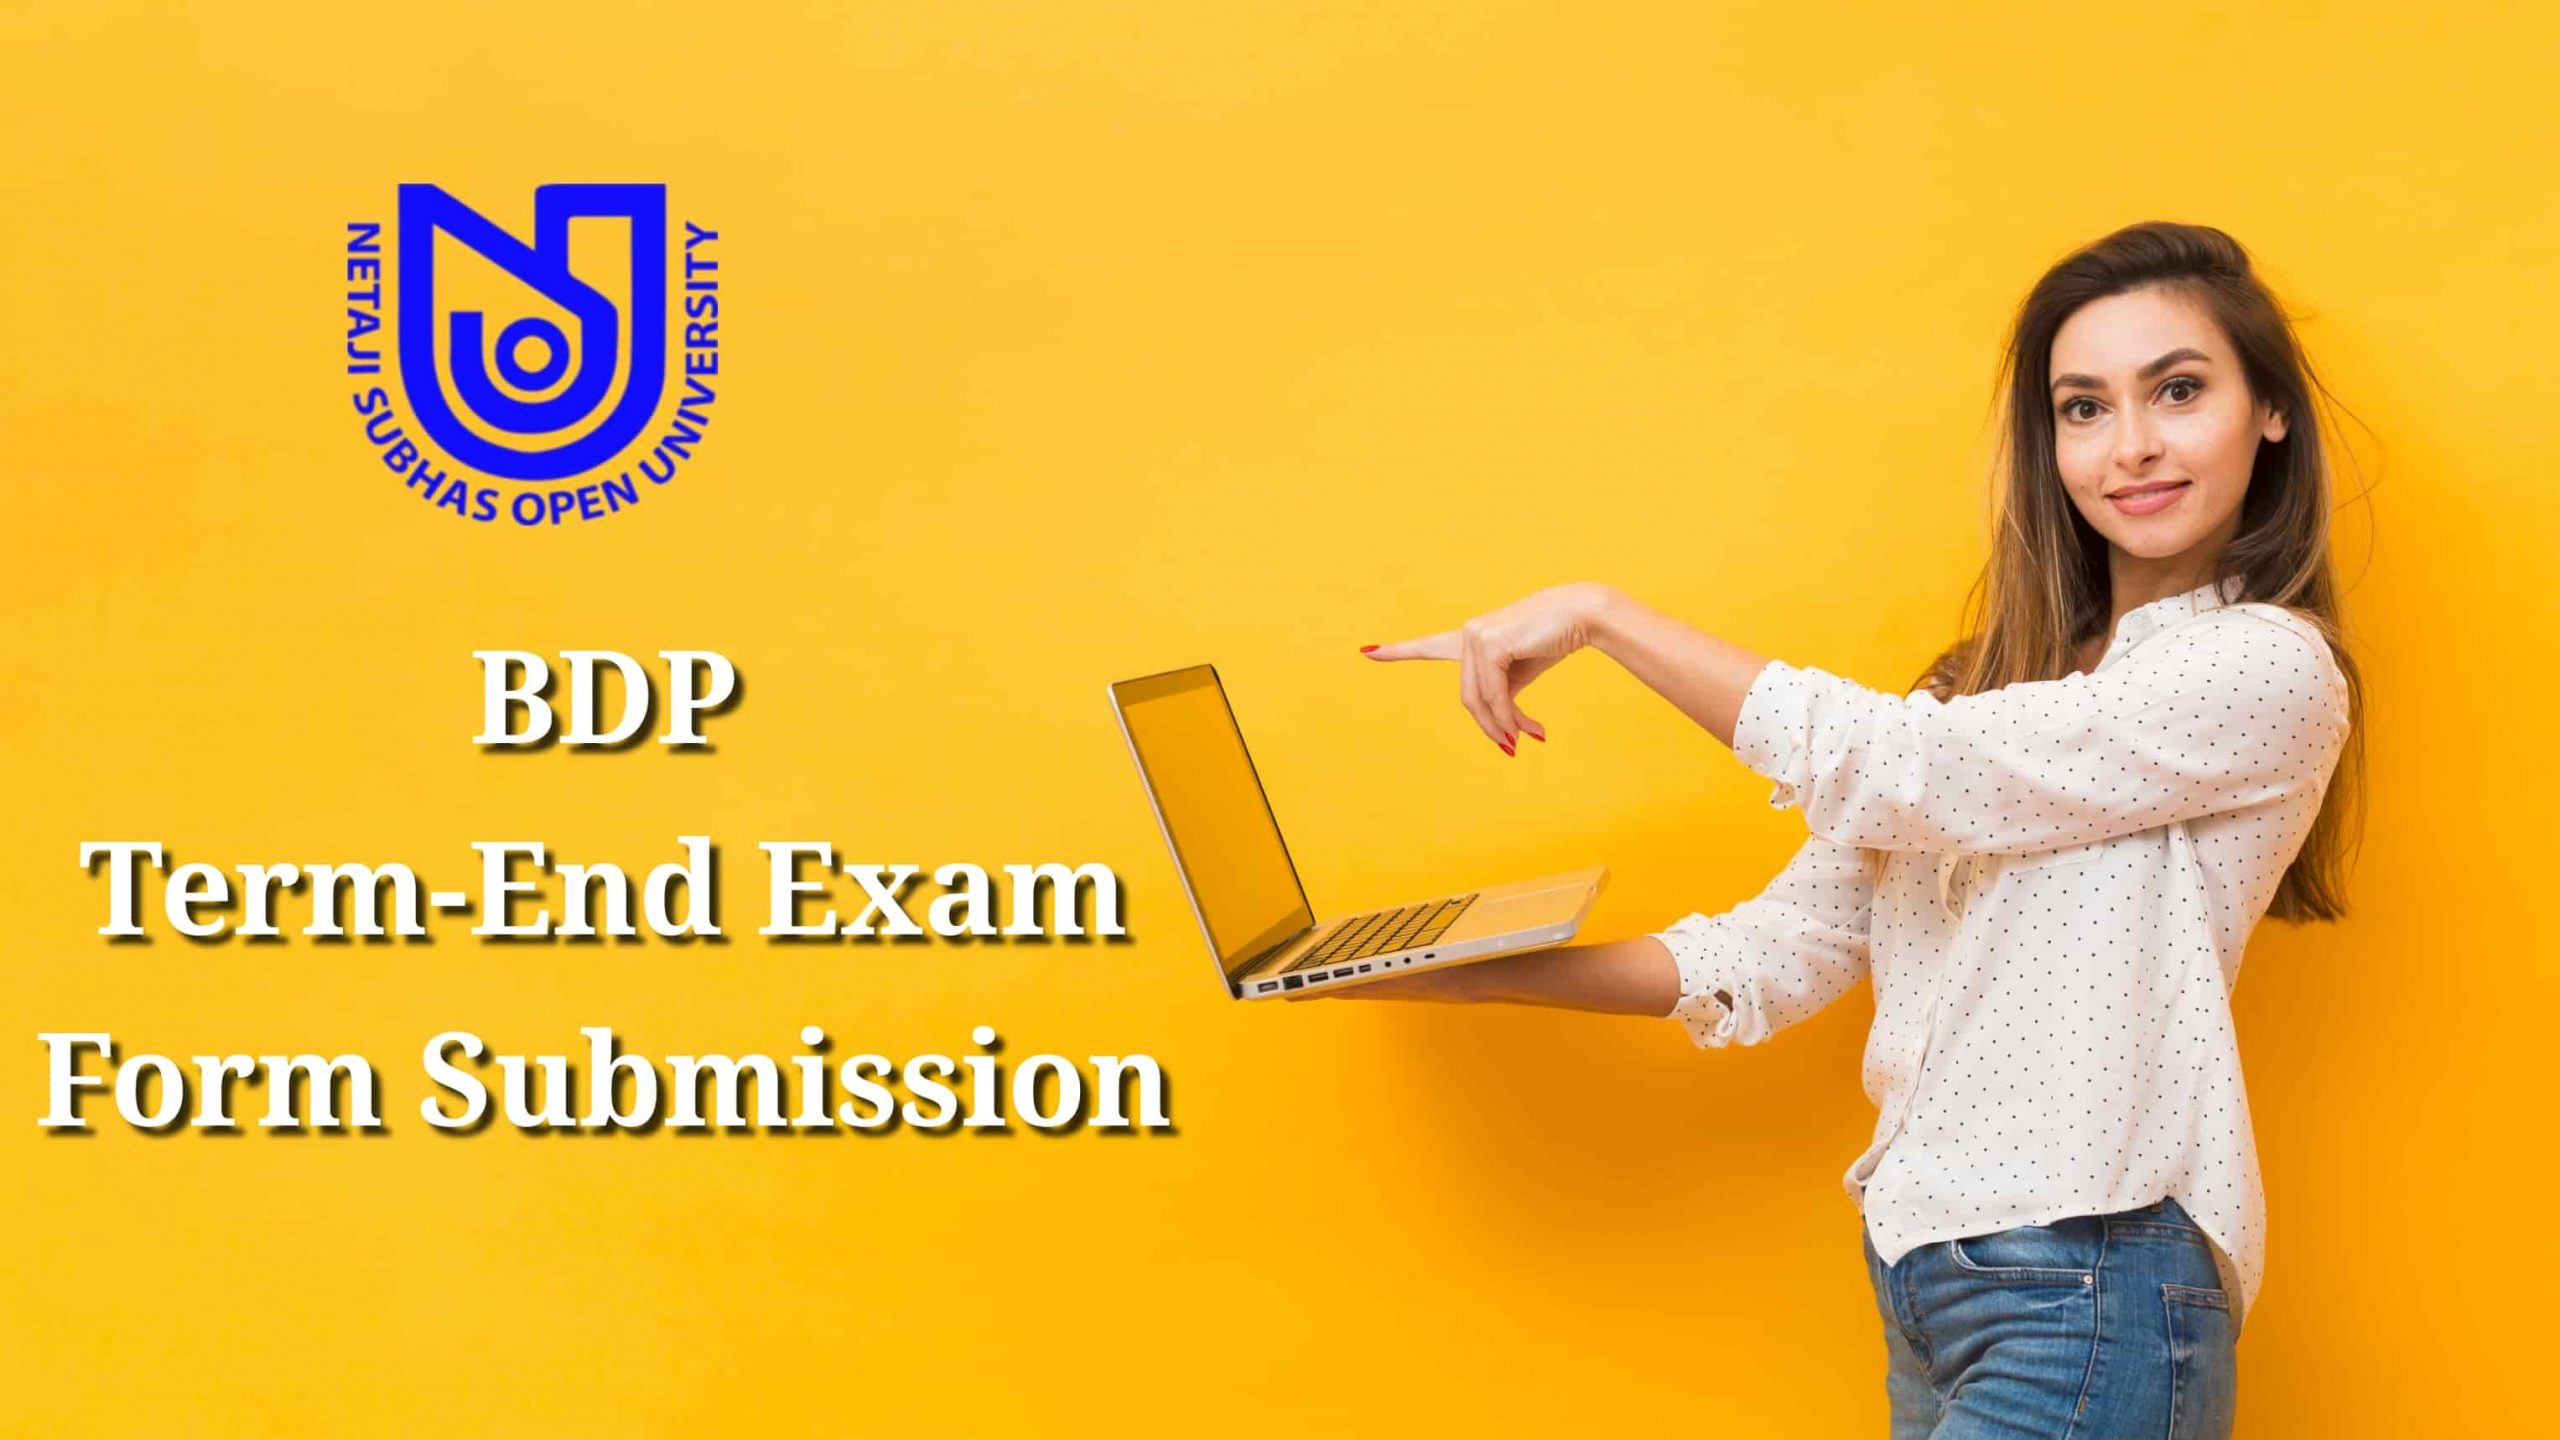 NSOU BDP Exam Form Submission for Term-End Exam 2020